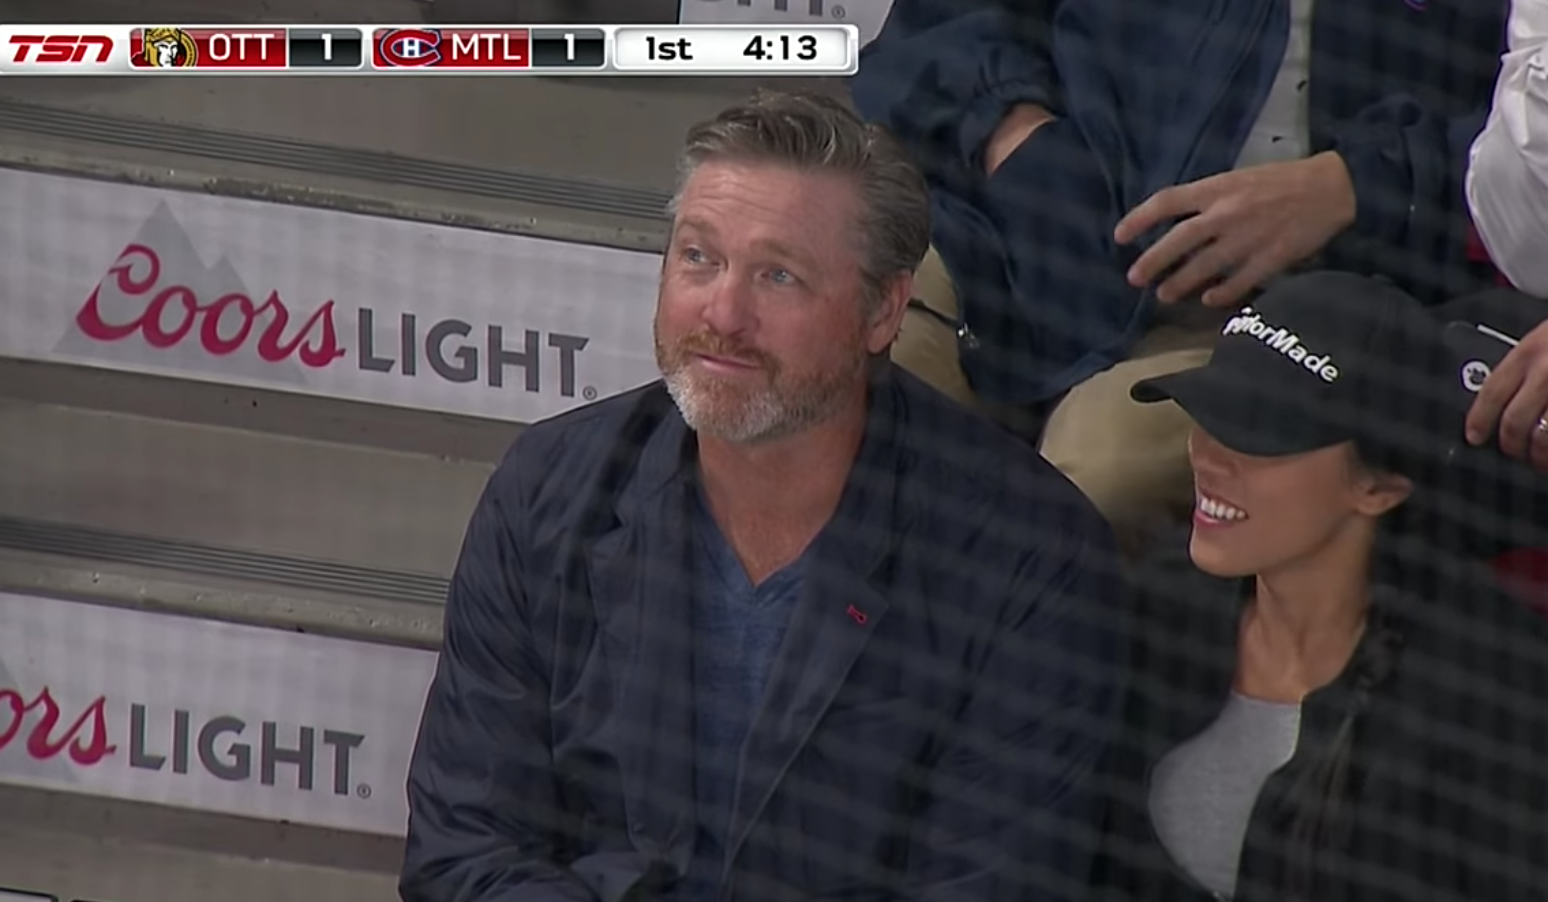 Patrick Roy is the amateur's choice for Canadian leadership

